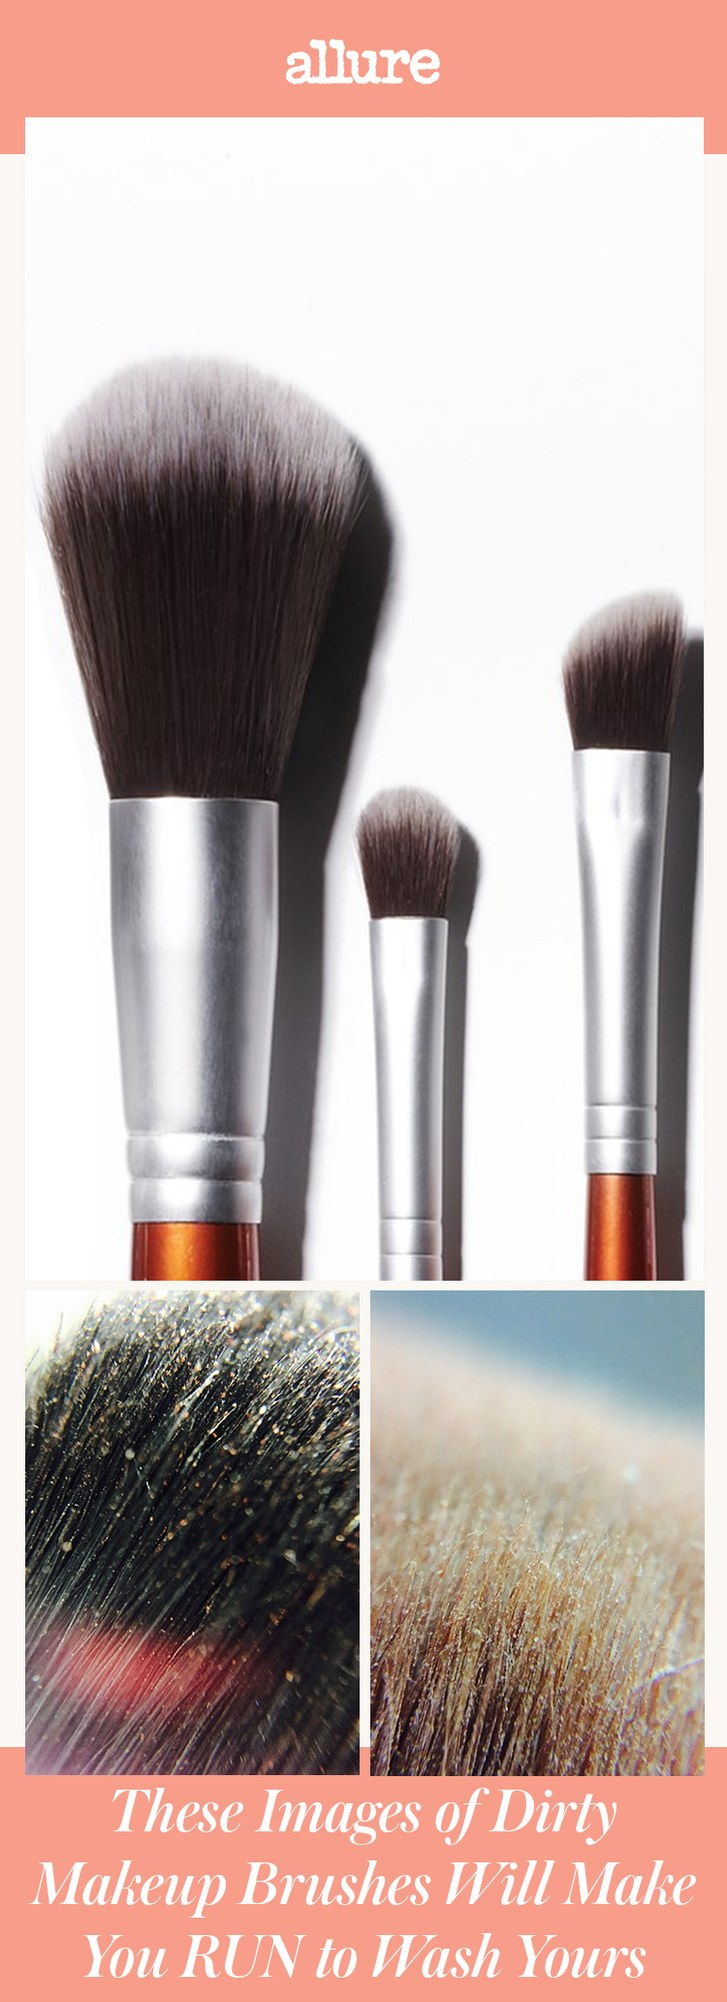 Reddit User Captures Close-Up Pictures of Dirty Makeup Brushes